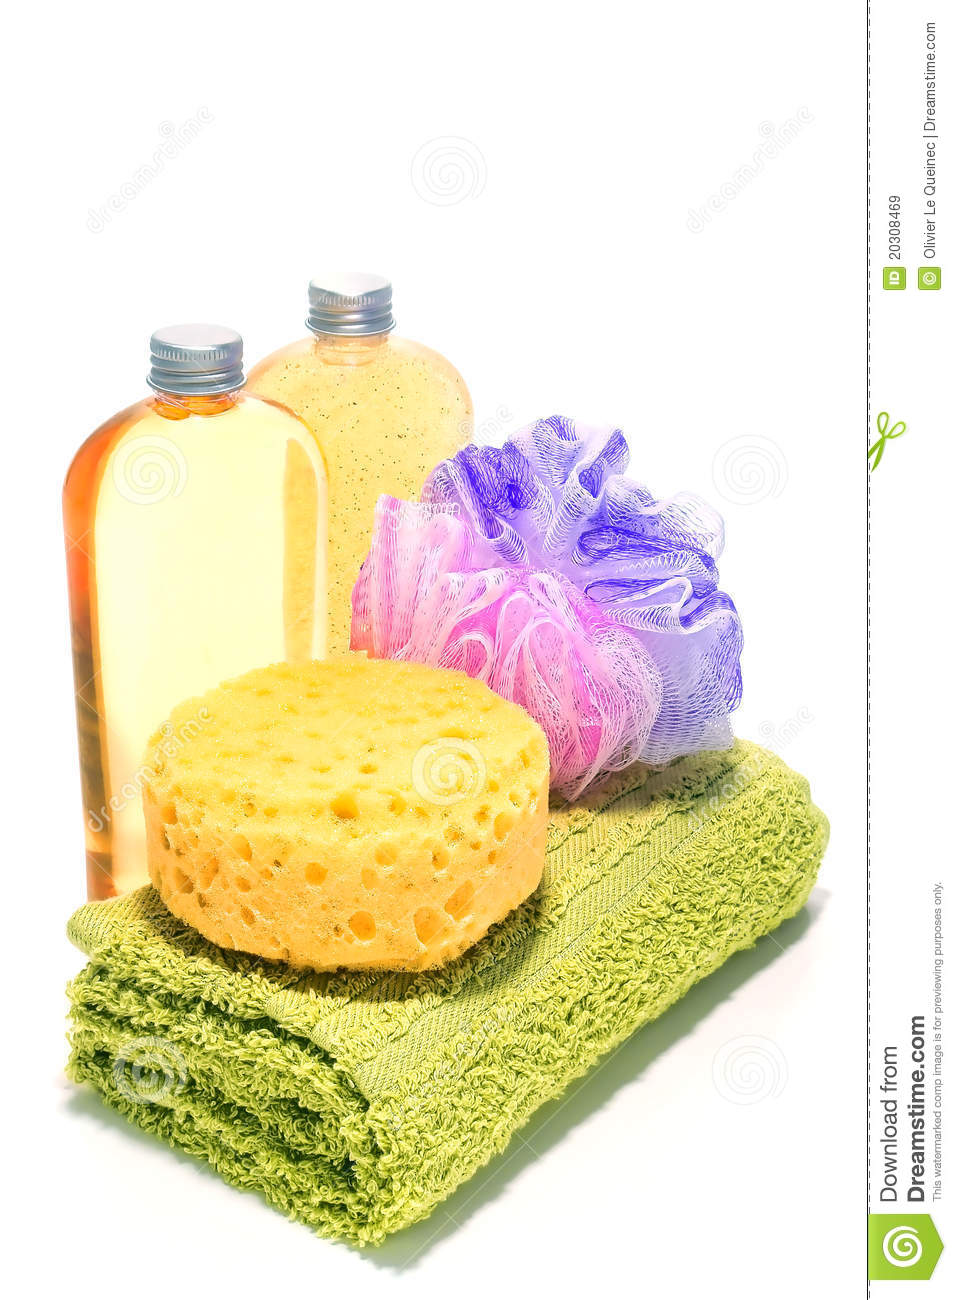 Of Bottles Of Hygiene Shampoo And Liquid Body Wash Soap Over White